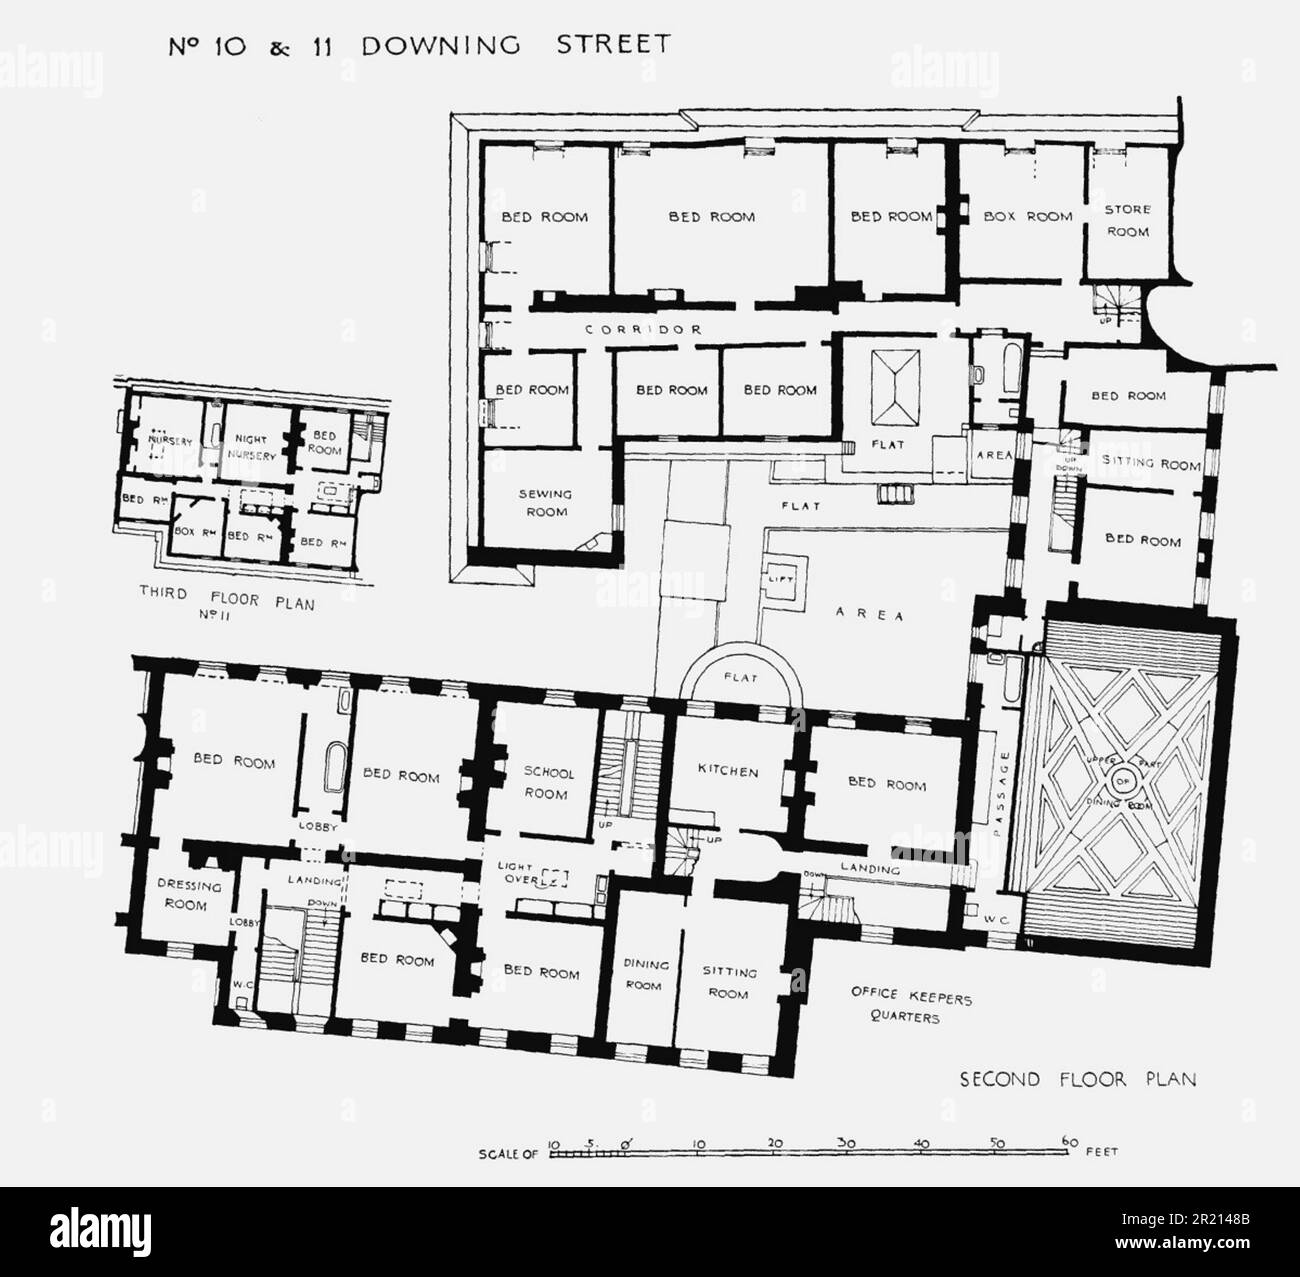 Floor plan of 10 Downing Street in London, the official residence and executive office of the British prime minister. it is the headquarters of the Government of the United Kingdom. Situated in Downing Street in the City of Westminster, London, Number 10 is over 300 years old and contains approximately 100 rooms. A private residence for the prime minister's use occupies the third floor and there is a kitchen in the basement. The other floors contain offices and conference, reception, sitting and dining rooms. Stock Photo